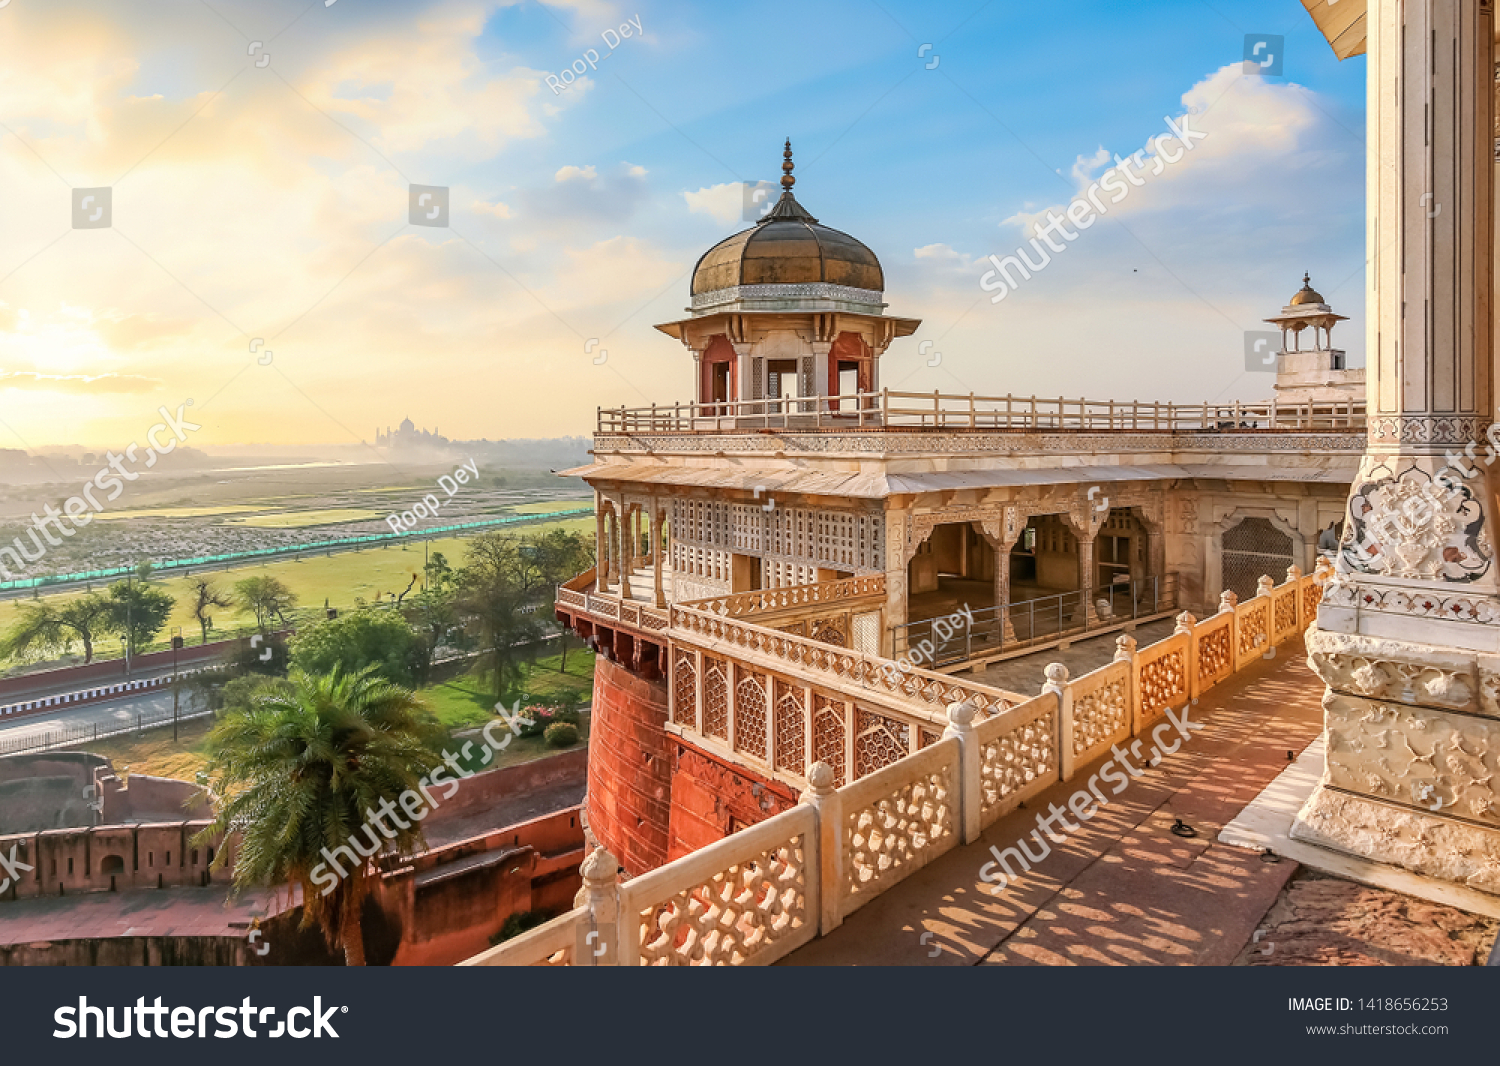 Agra Fort - Medieval Indian fort made of red sandstone and marble with view of dome at sunrise. View of Taj Mahal at a distance as seen from Agra Fort. #1418656253